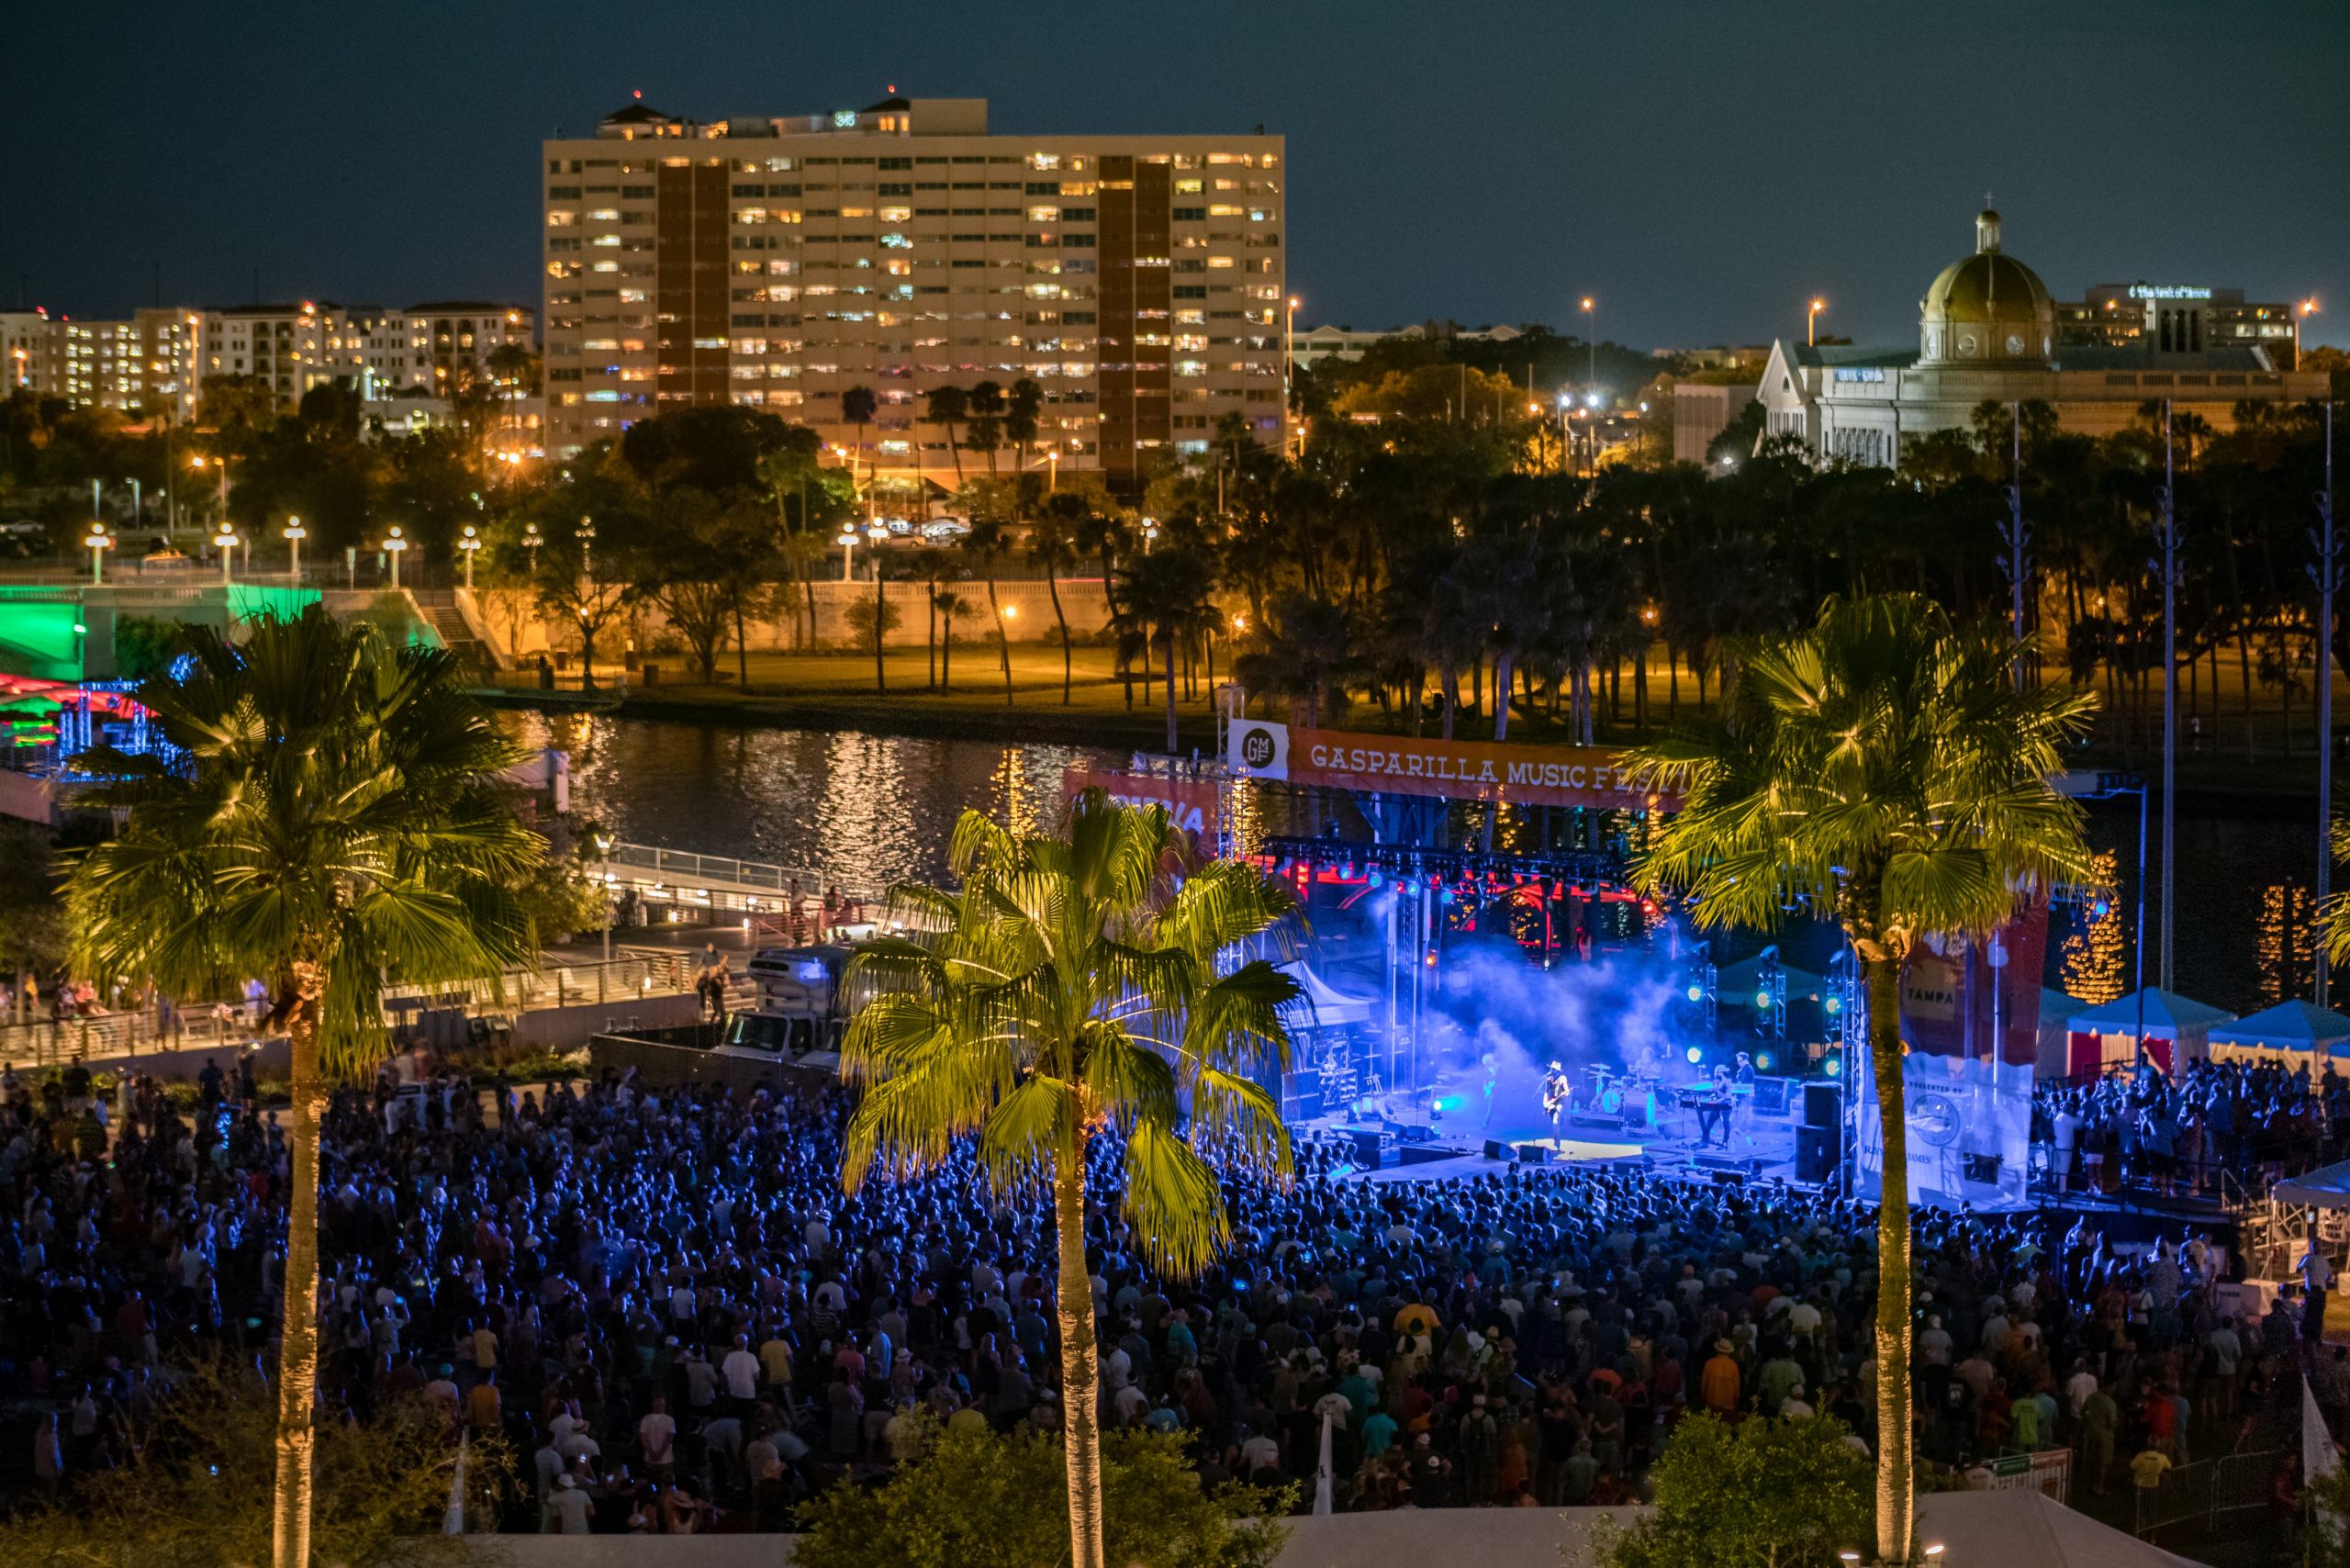 Get Ready For The Gasparilla Music Festival This October Osprey Observer